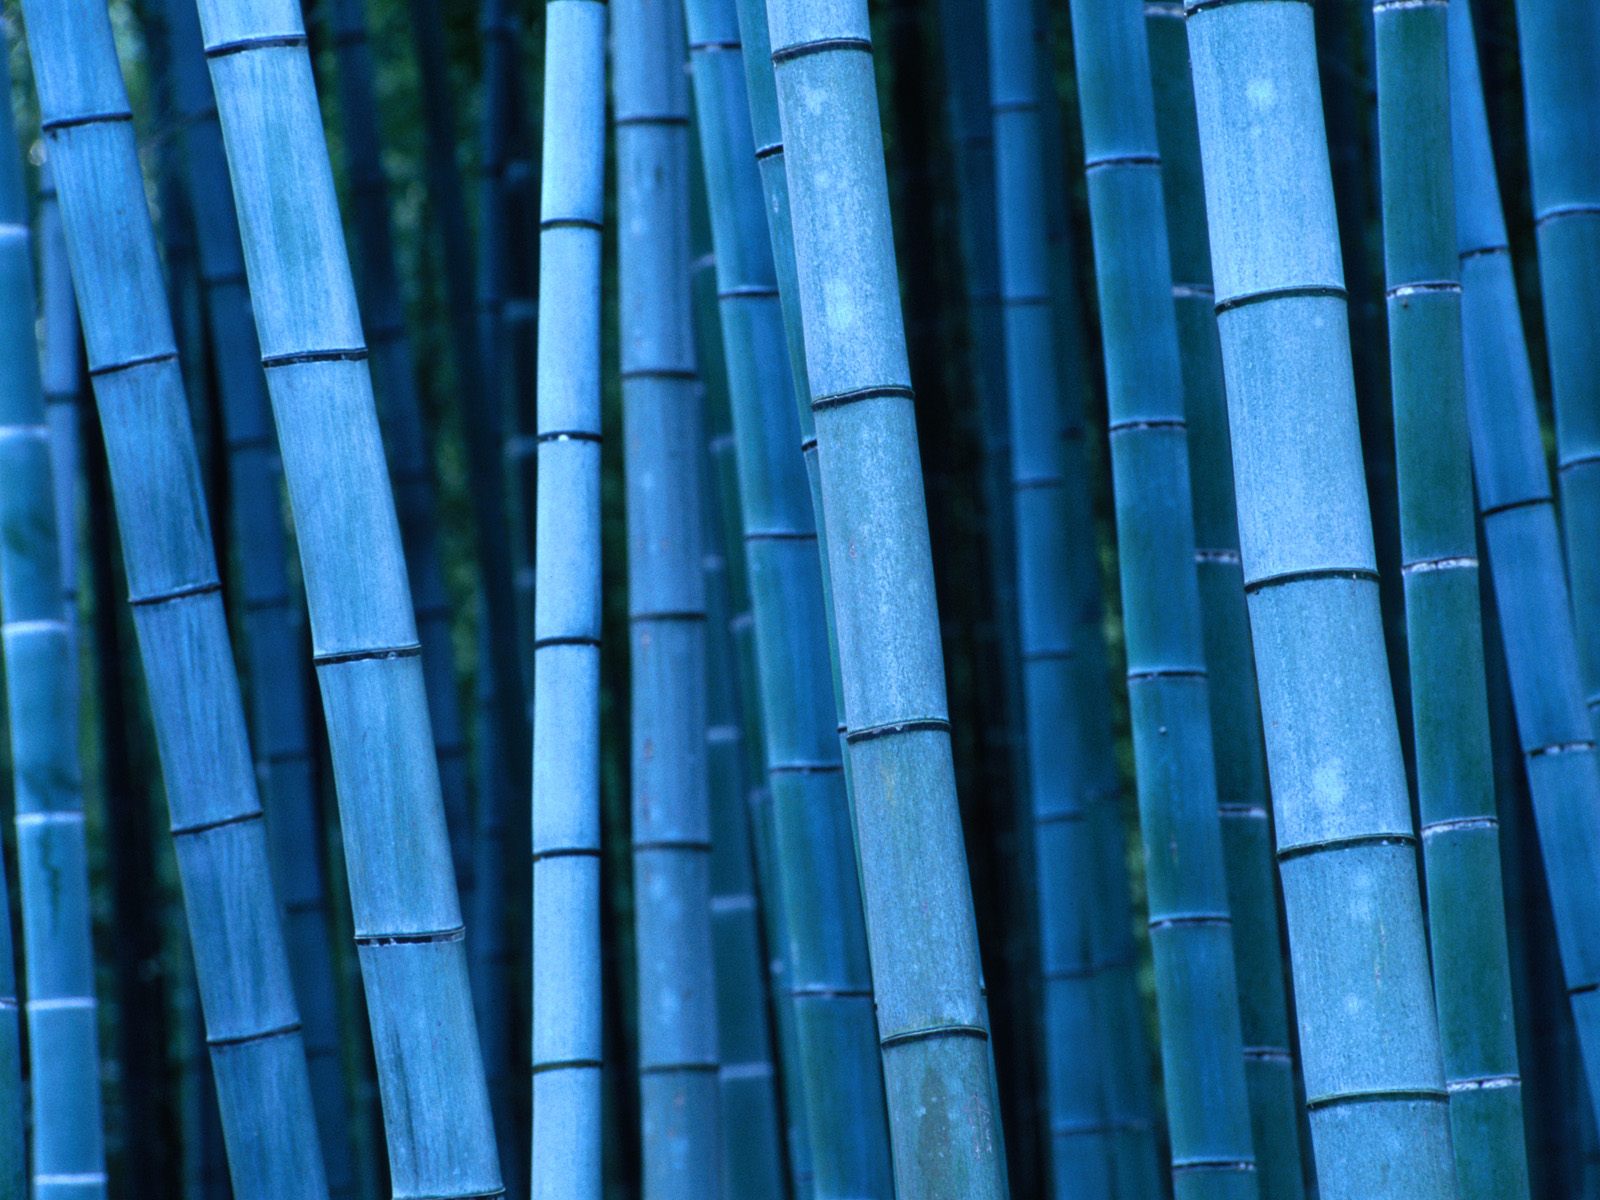 Wallpaper, animated, mobile, designs, bamboo, nature, pictures, plants